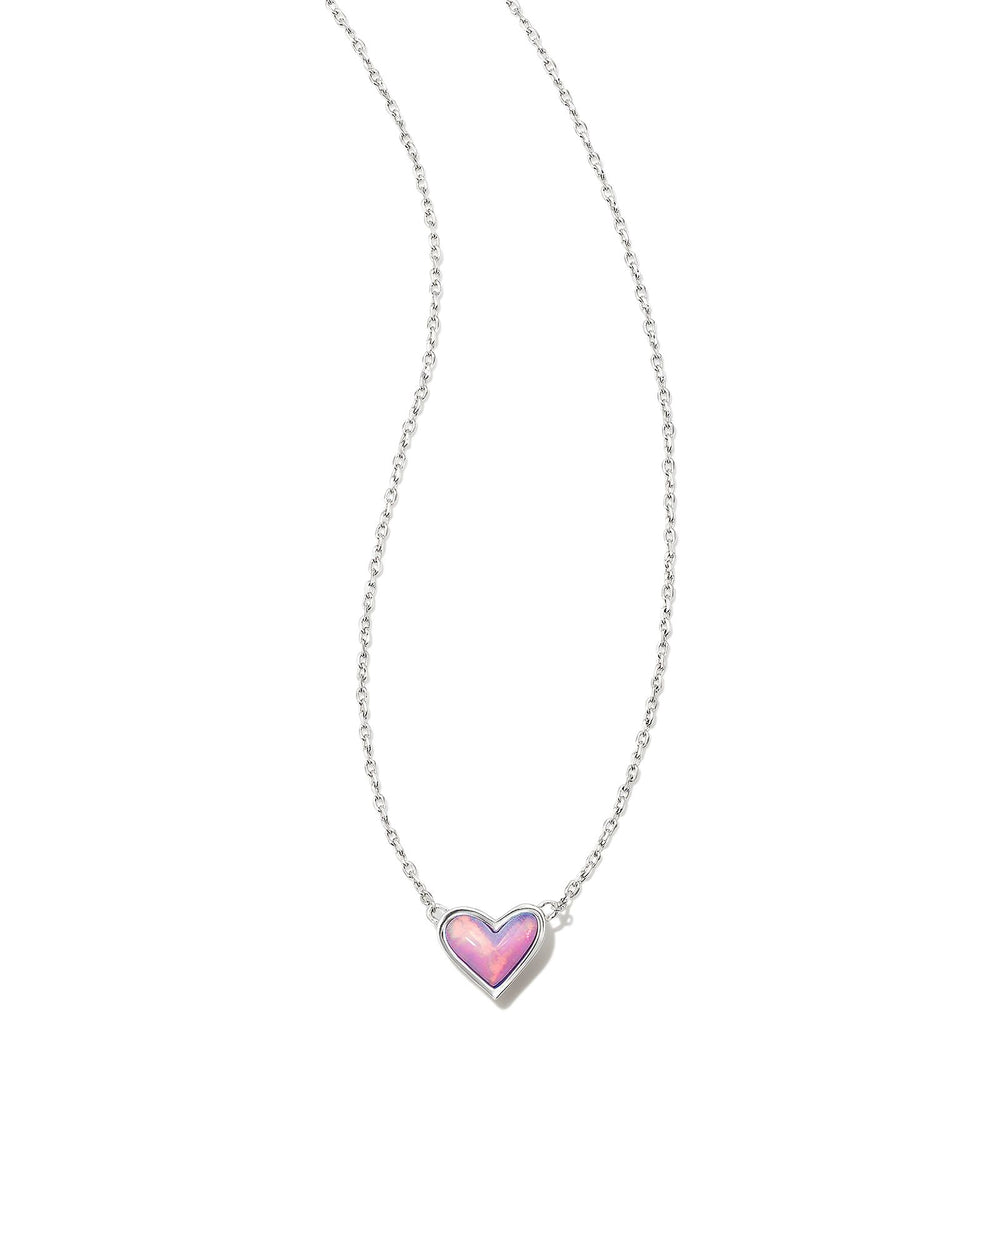 Framed Ari Heart Necklace Silver in Lilac Opalescent Resin